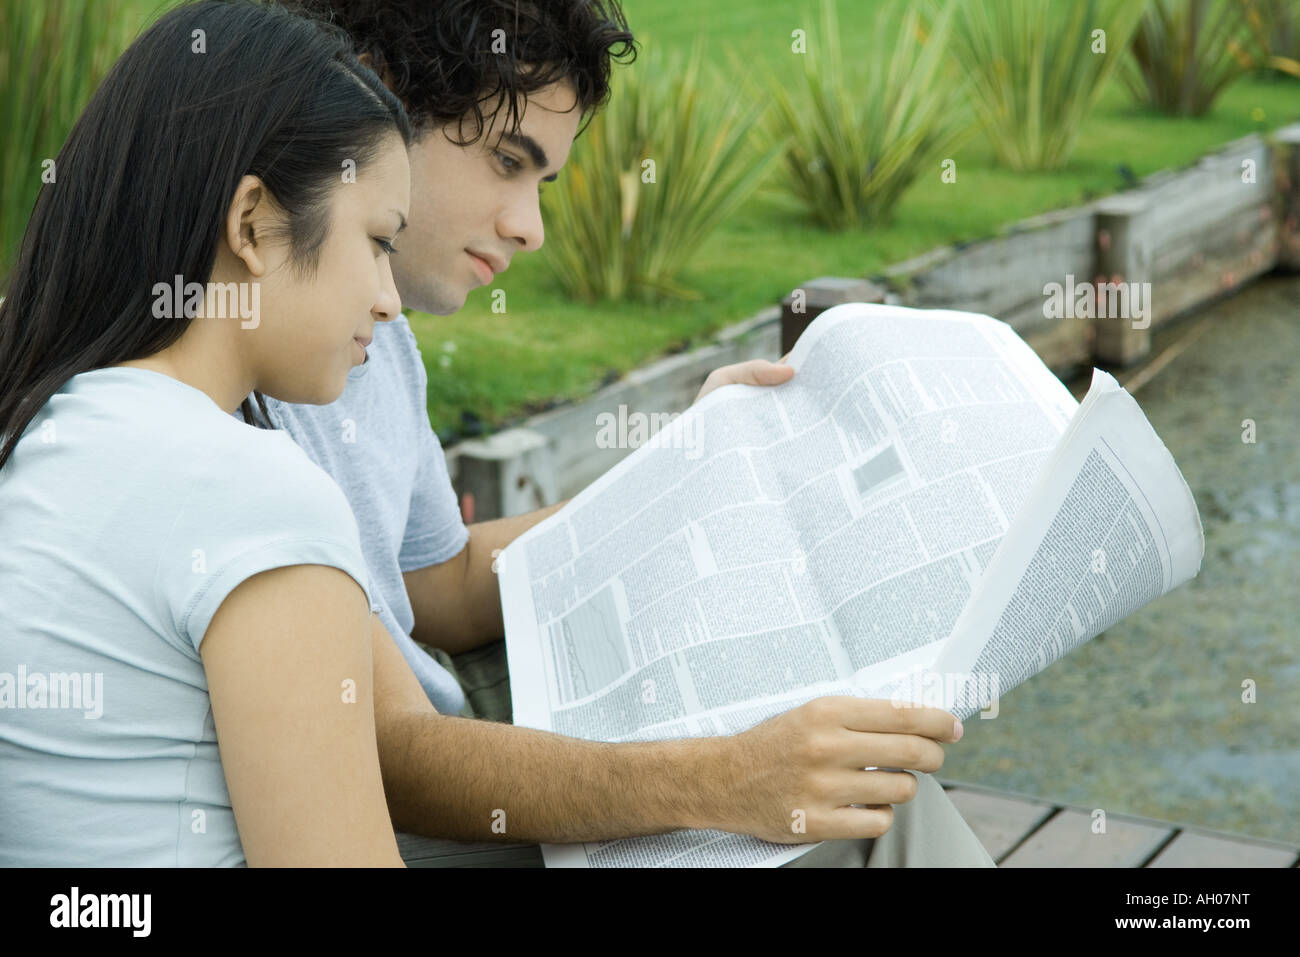 Young couple reading newspaper together outdoors Stock Photo